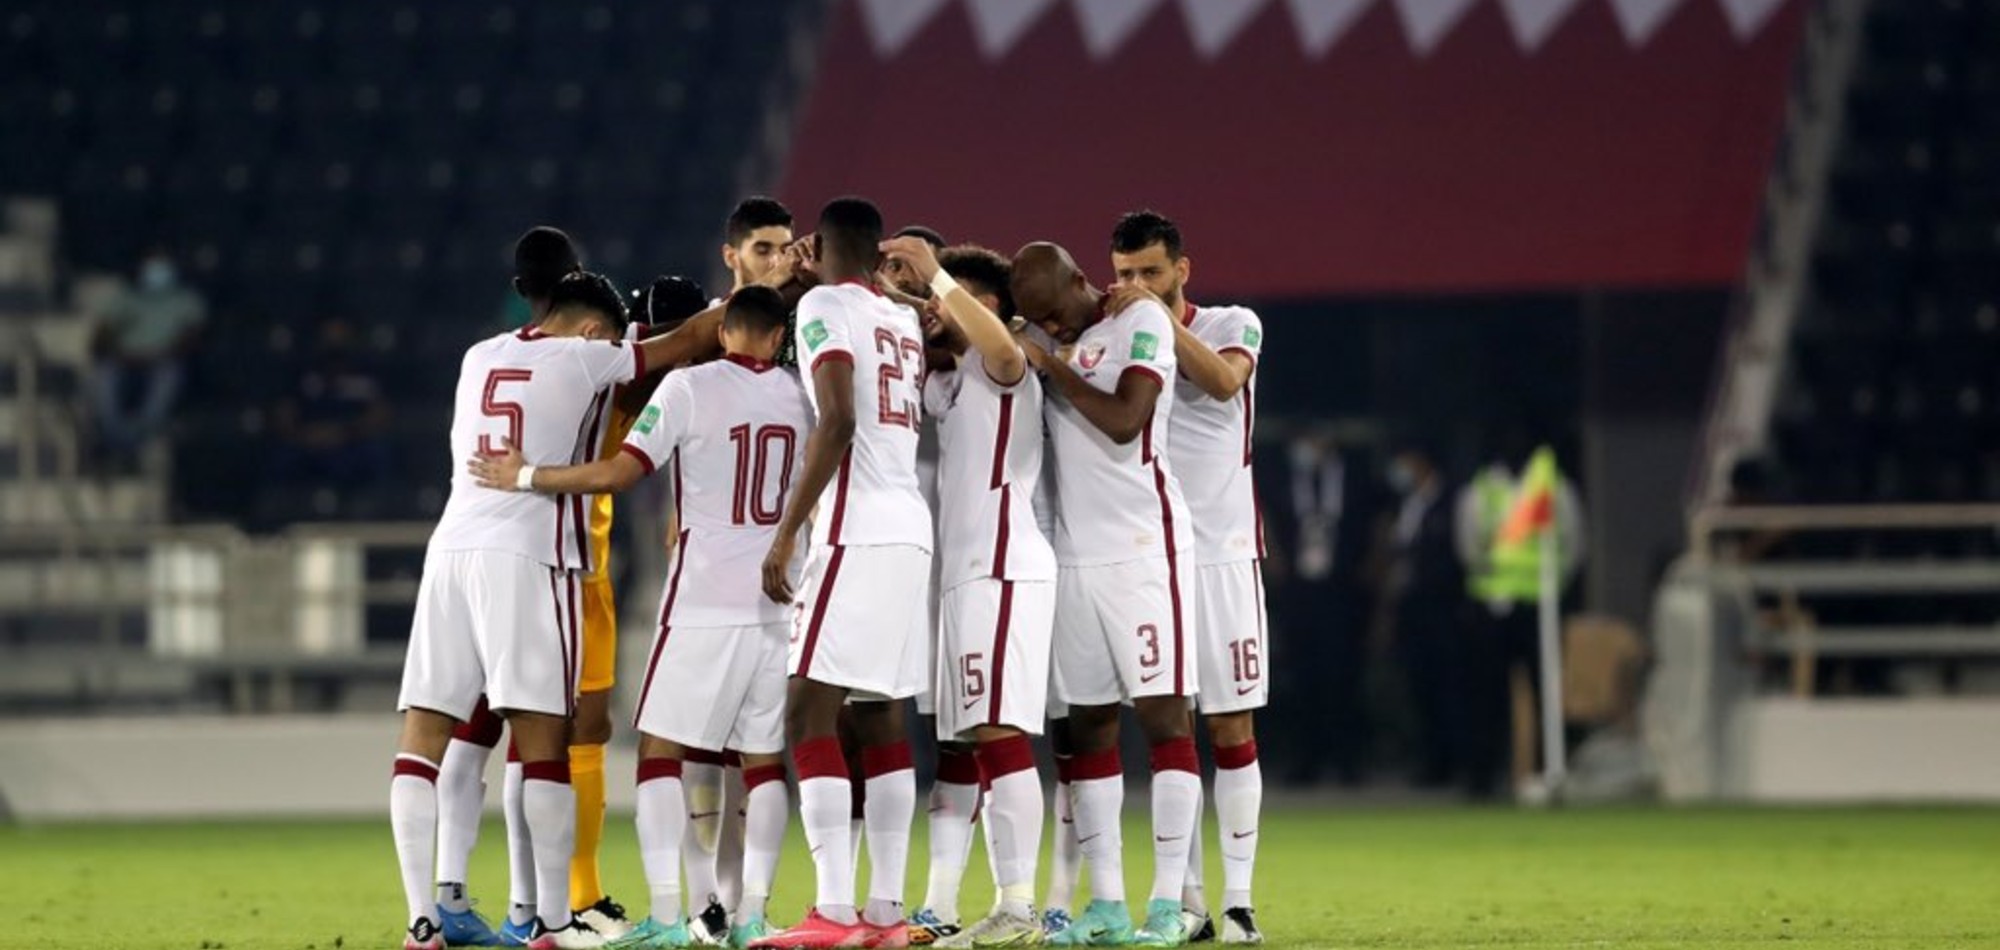 Qatar Qualifies for AFC 2023 in China after 1-0 win against Oman